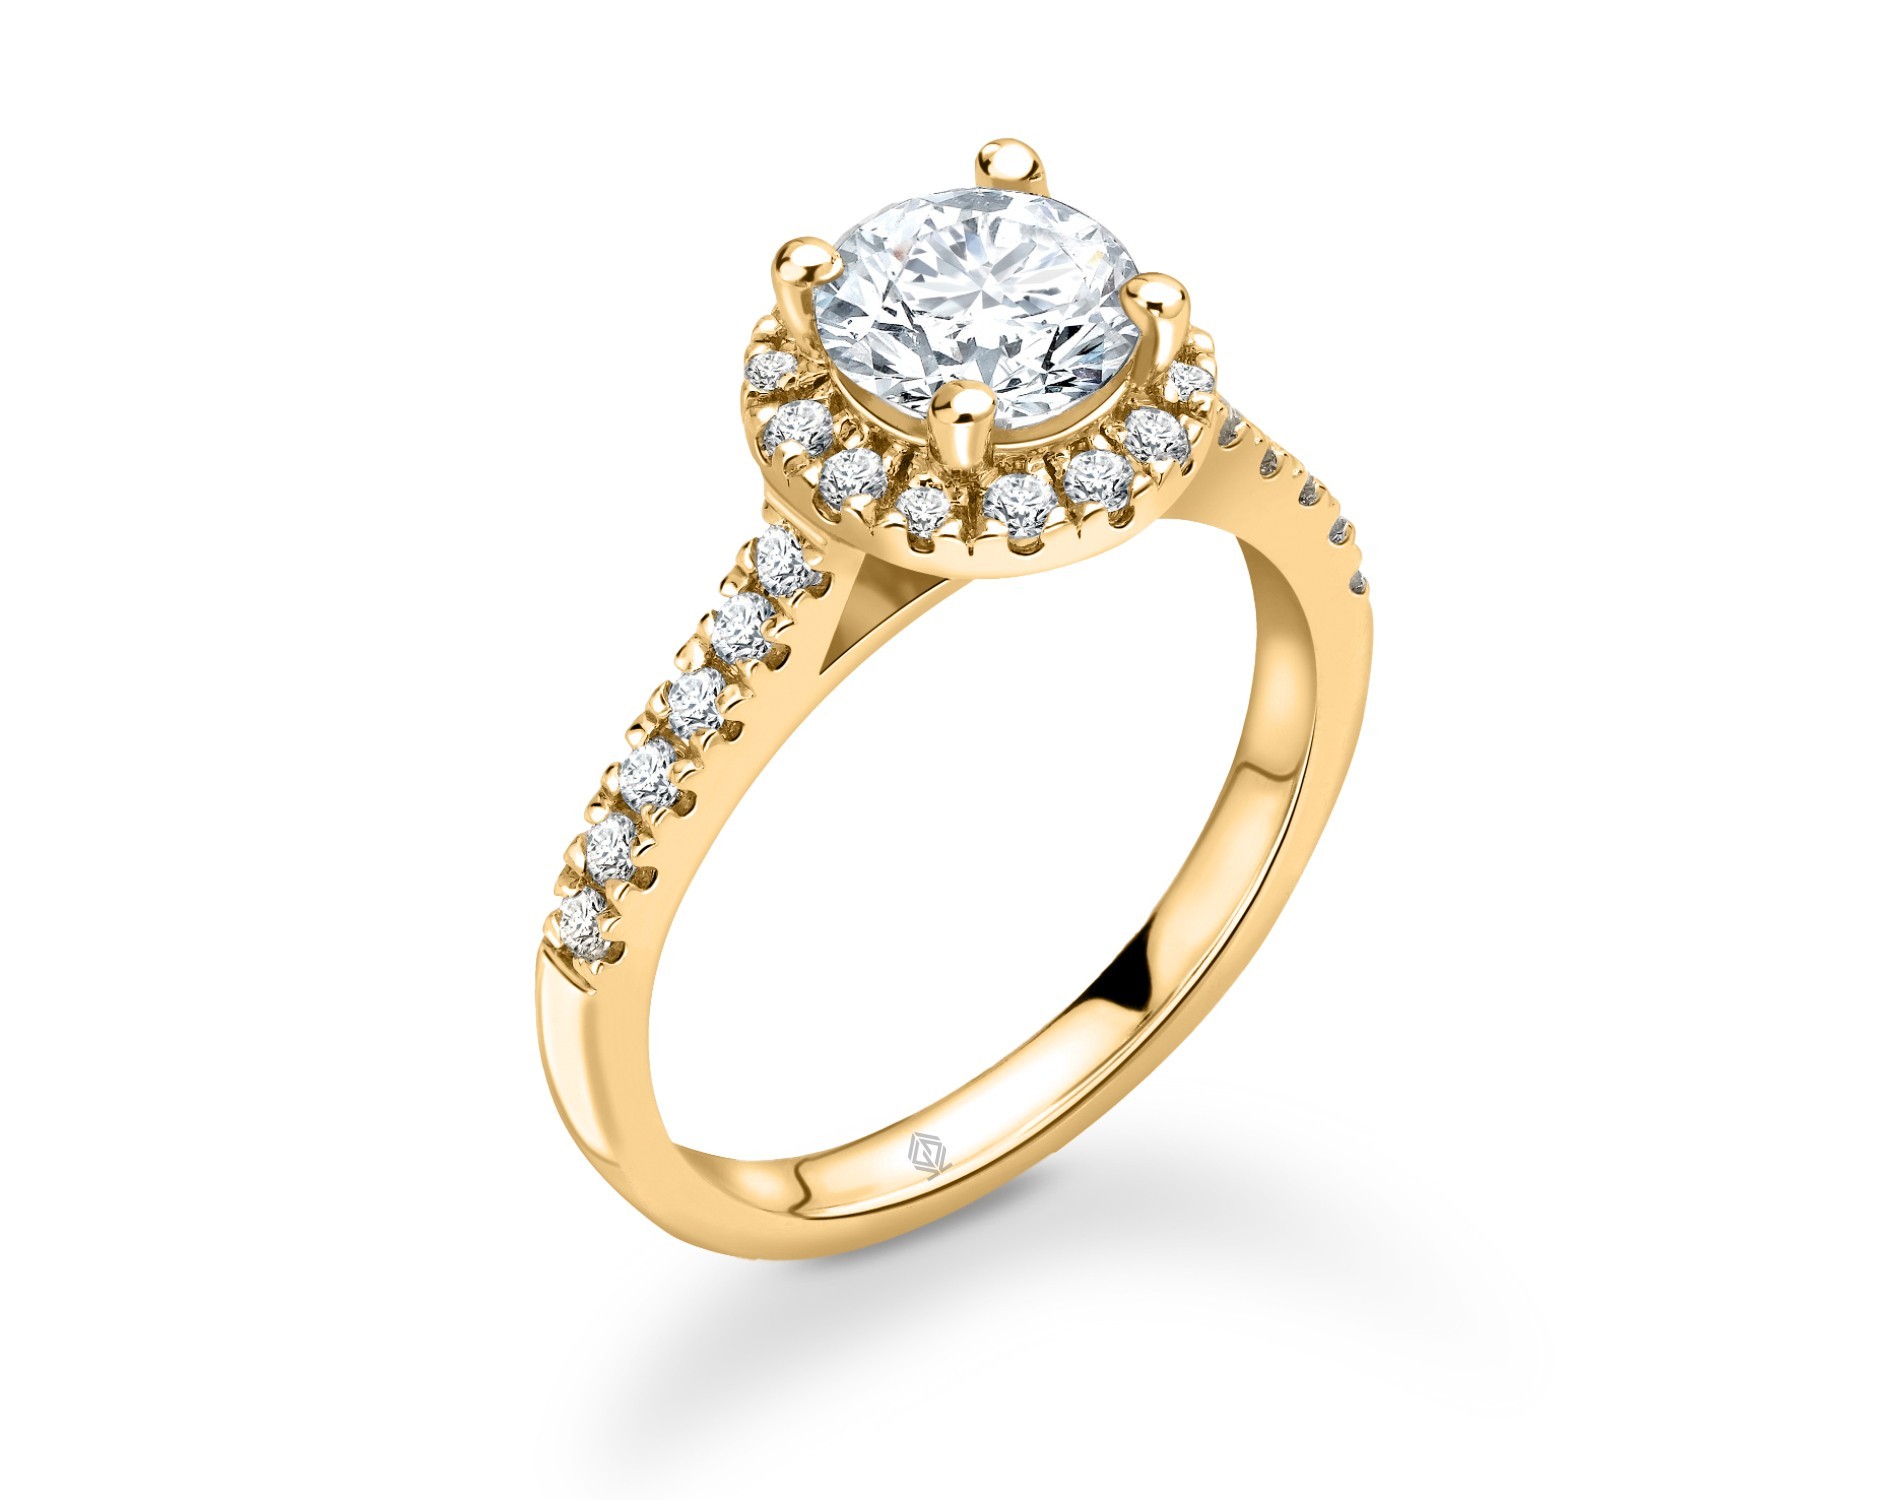 18K YELLOW GOLD HALO ROUND CUT DIAMOND ENGAGEMENT RING WITH SIDE STONES PAVE SET